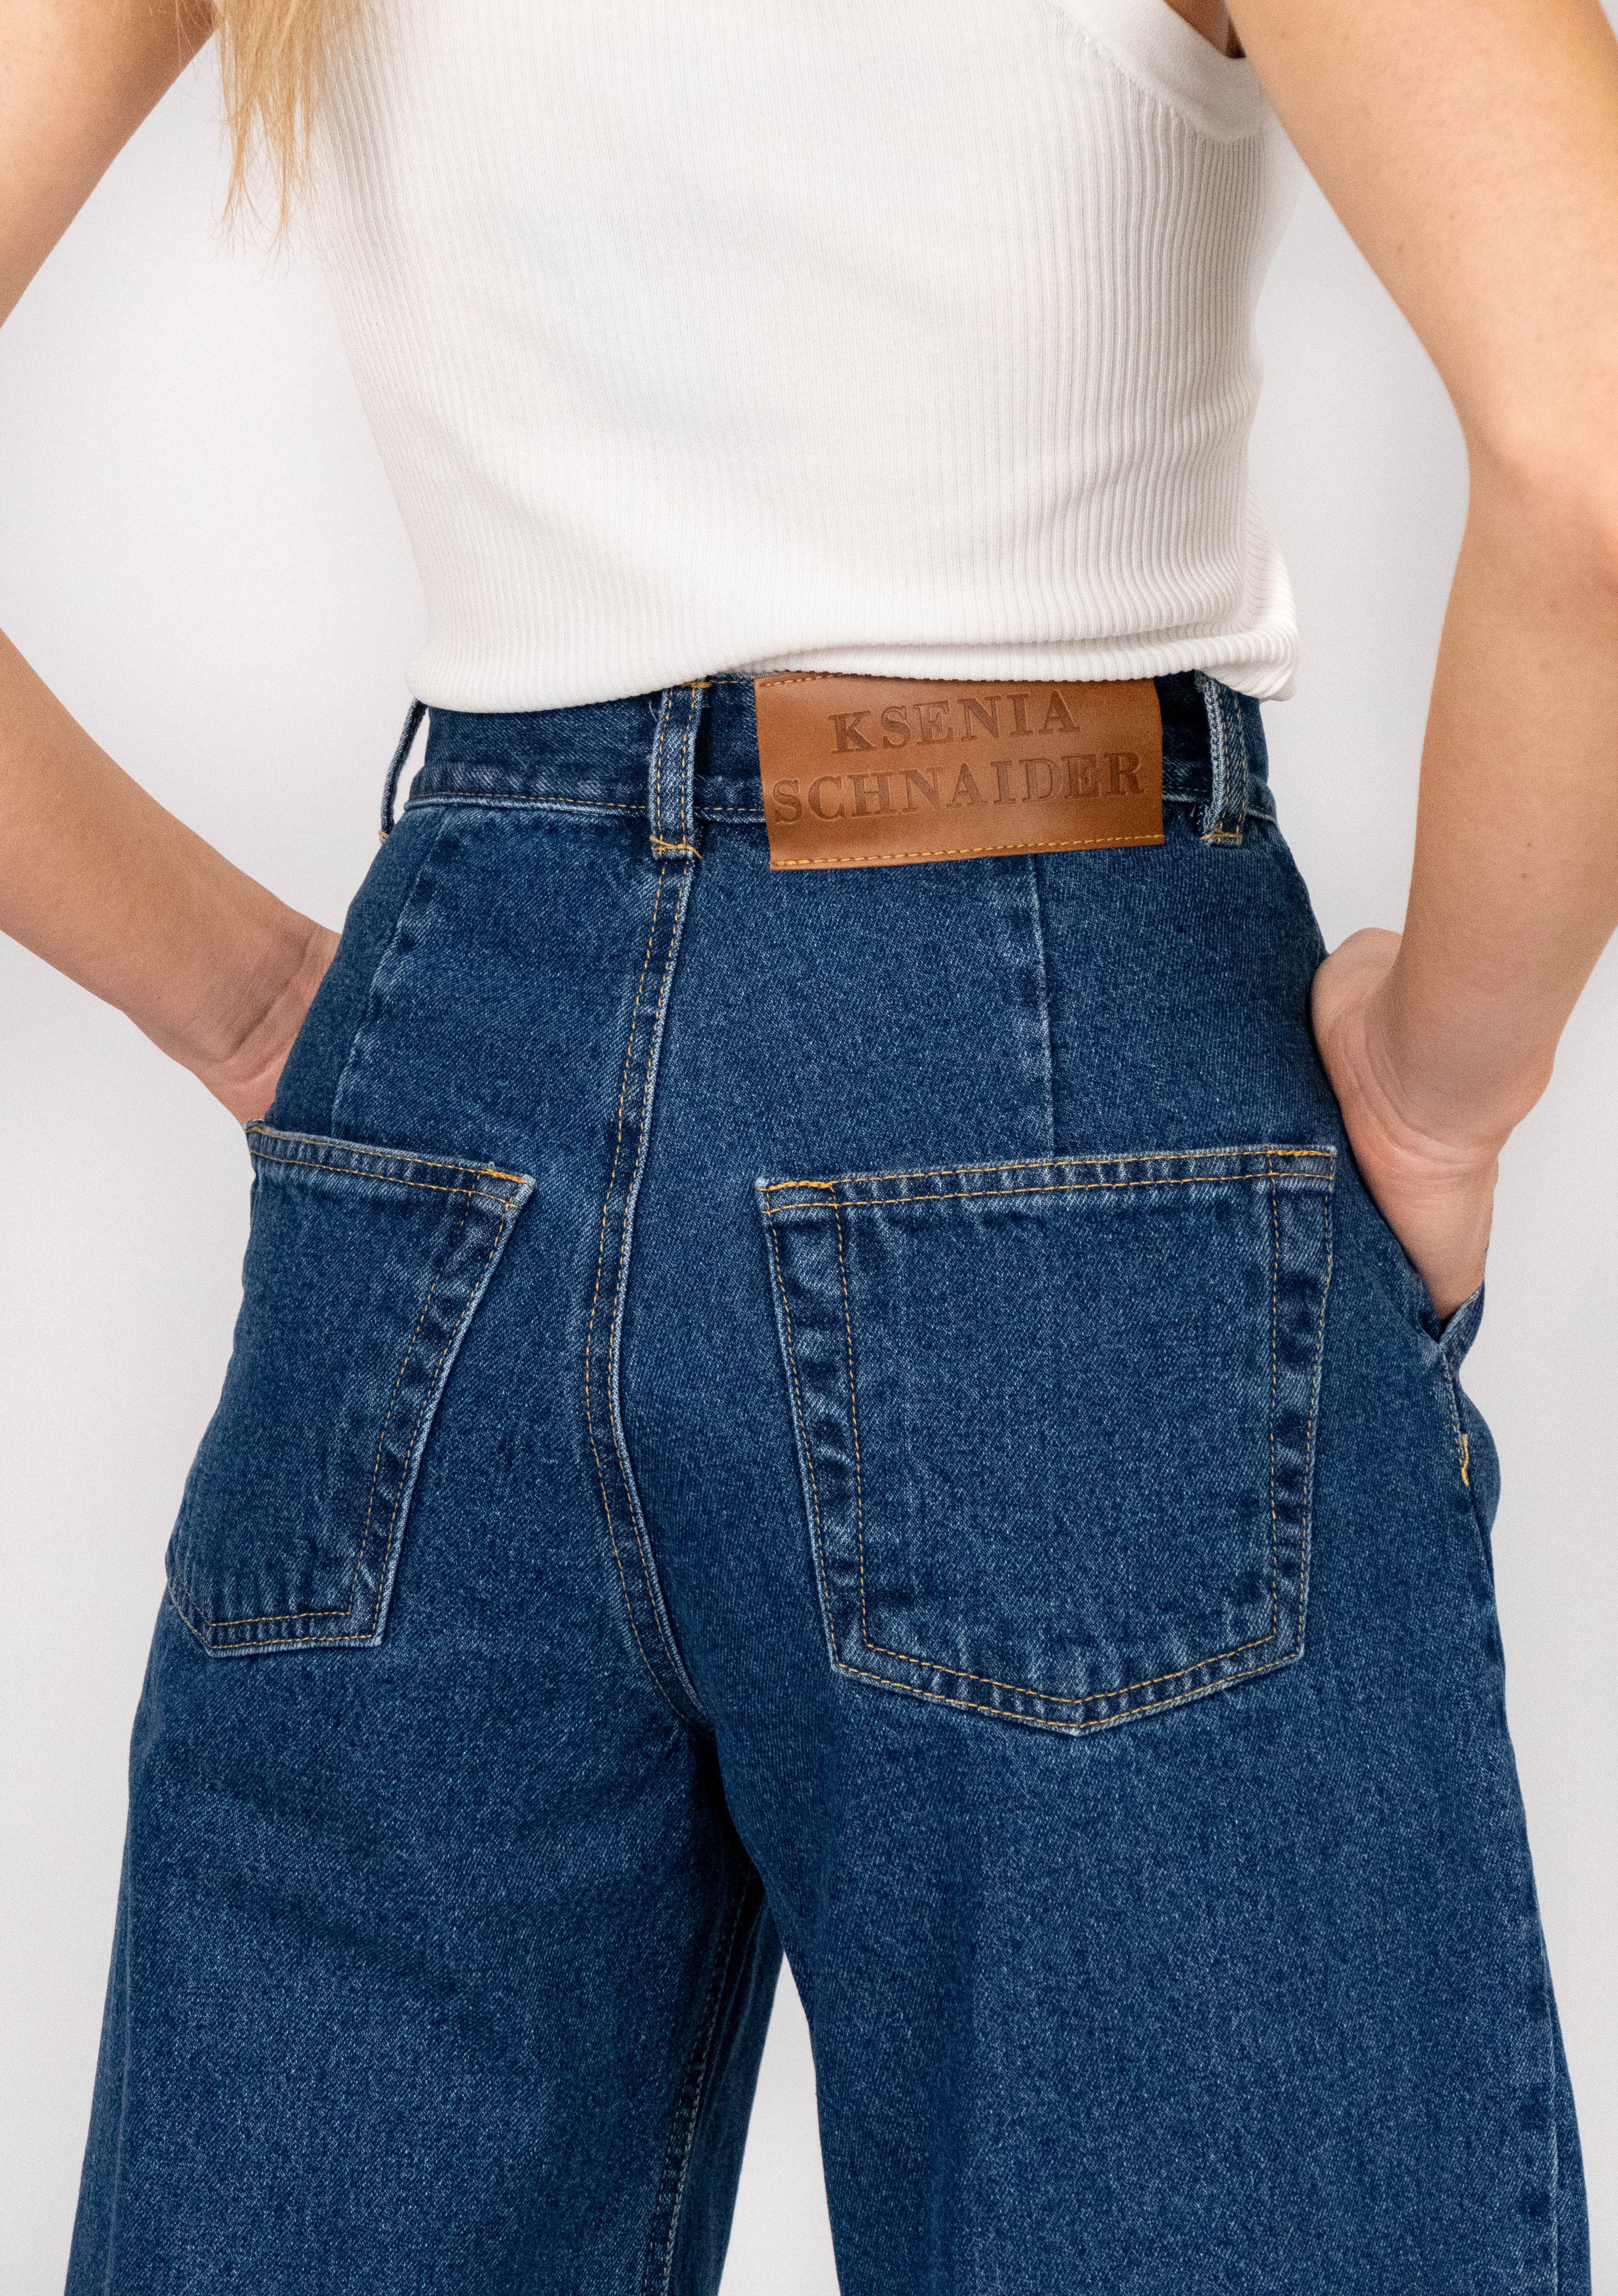 Wide Jeans folded at the Bottom